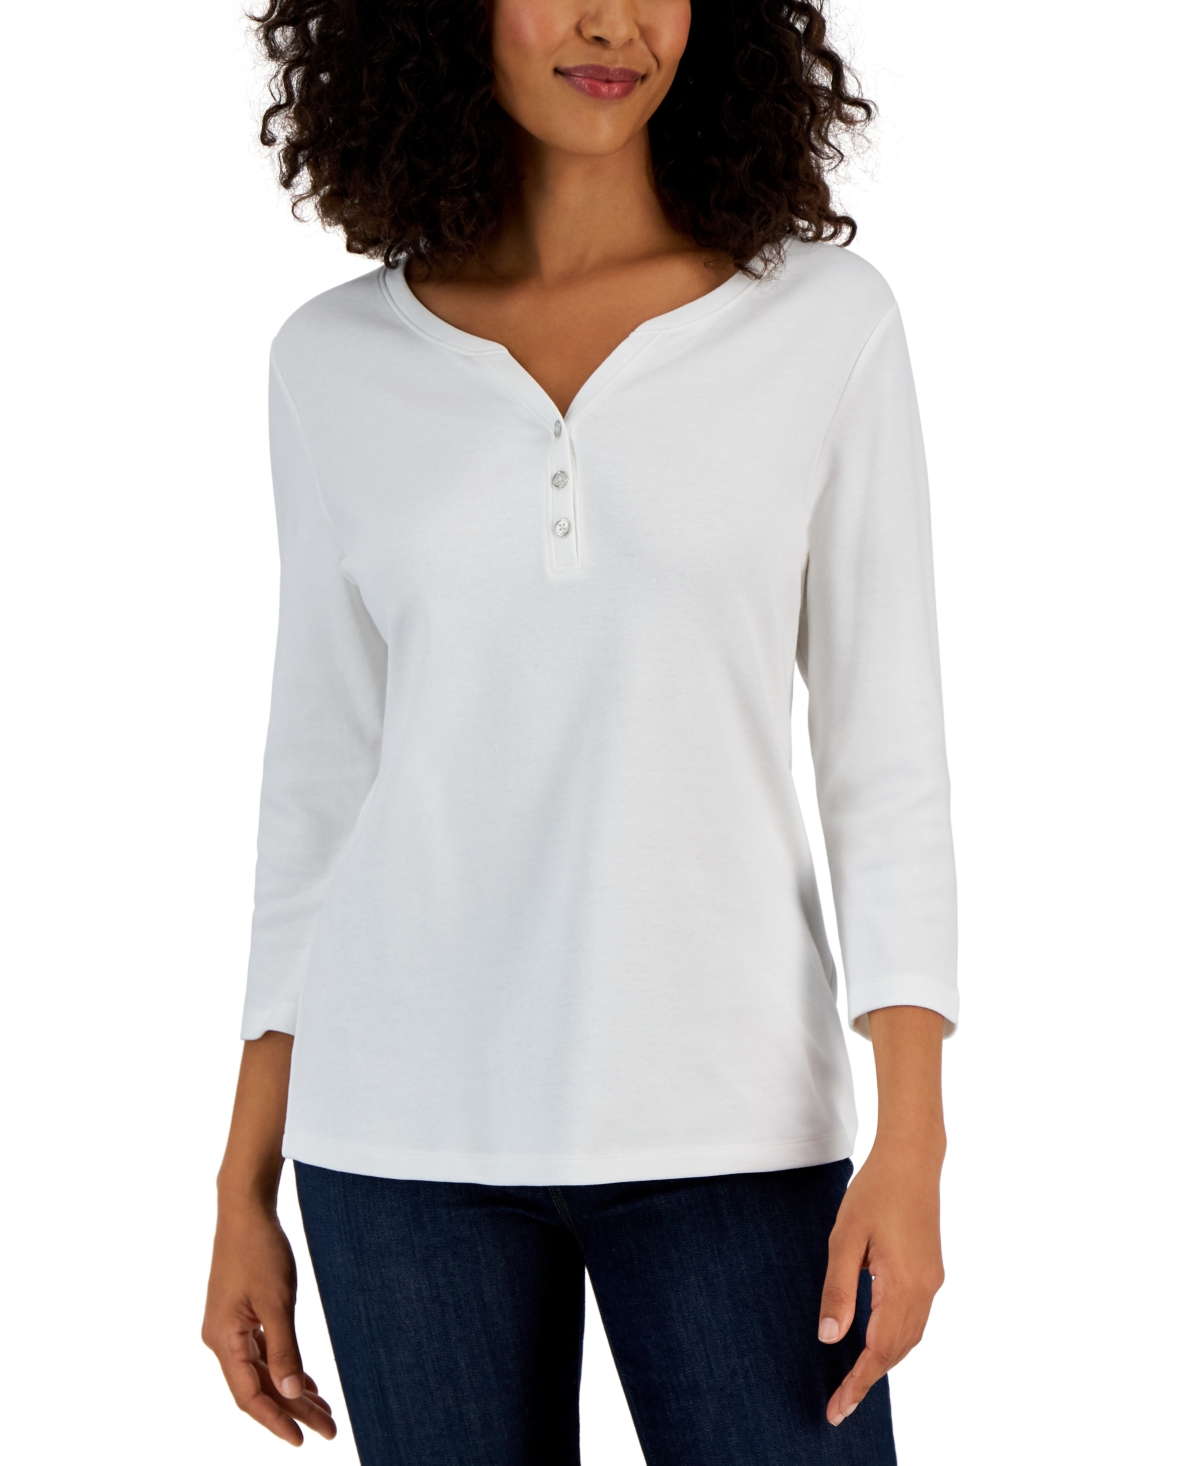 Cotton Henley V-Neck Top, Created for Macy's - Bright White